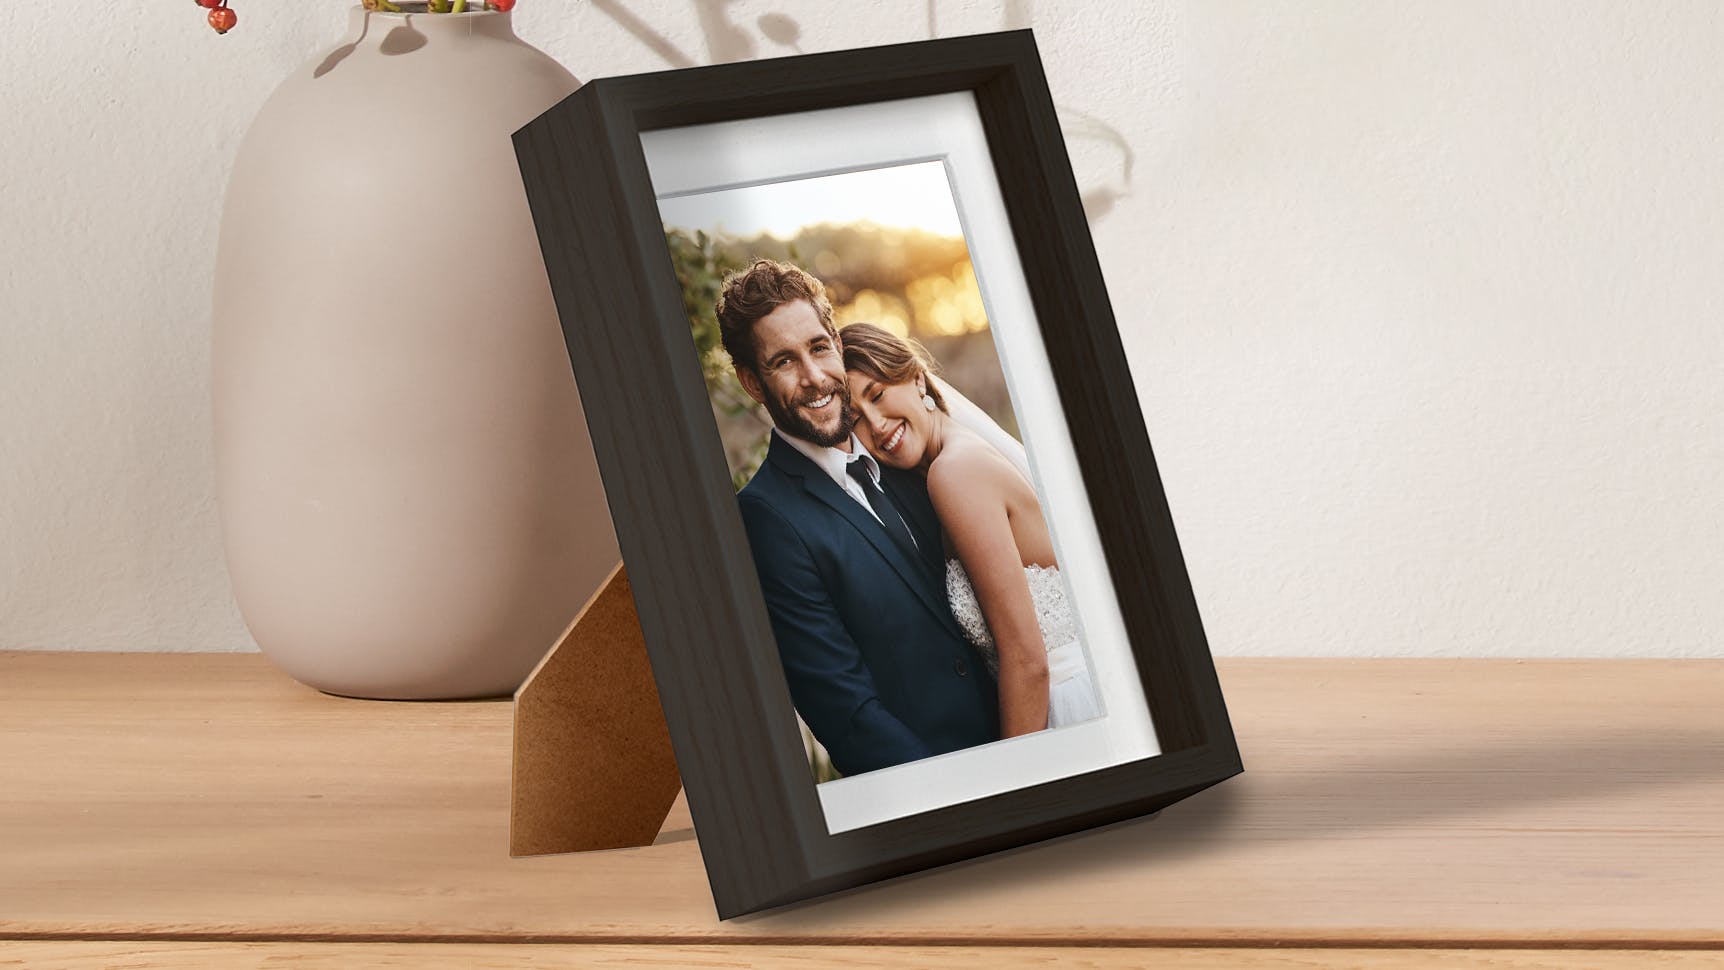 Framed photo to stand with a wedding image